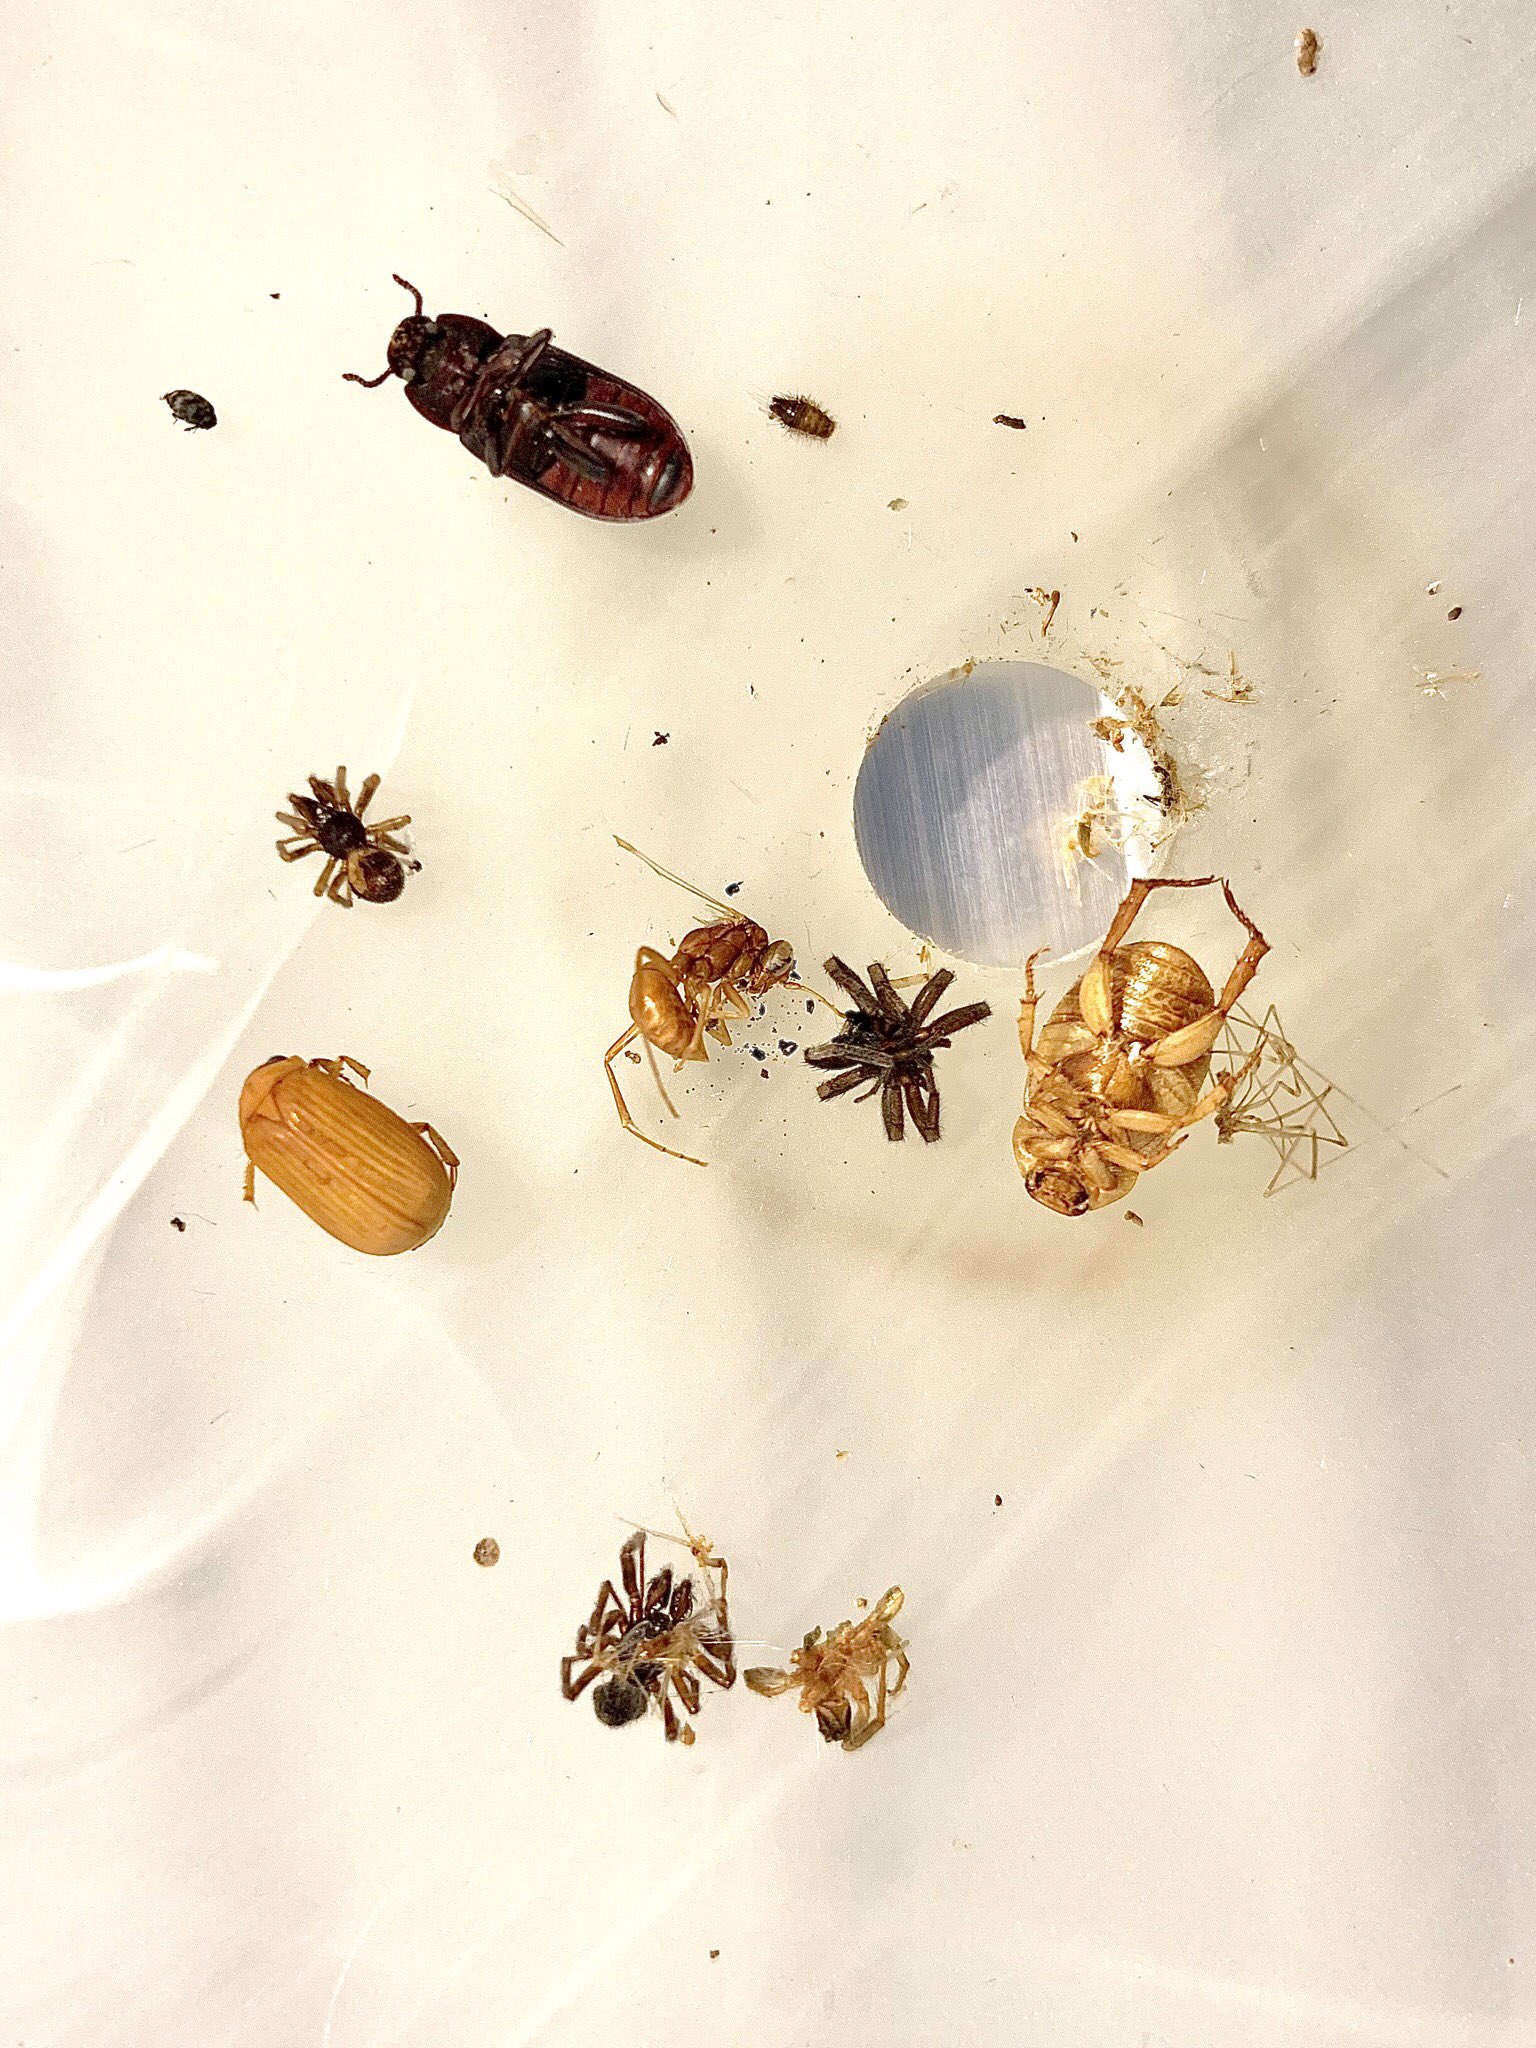 Some of the insects found in the light fixture